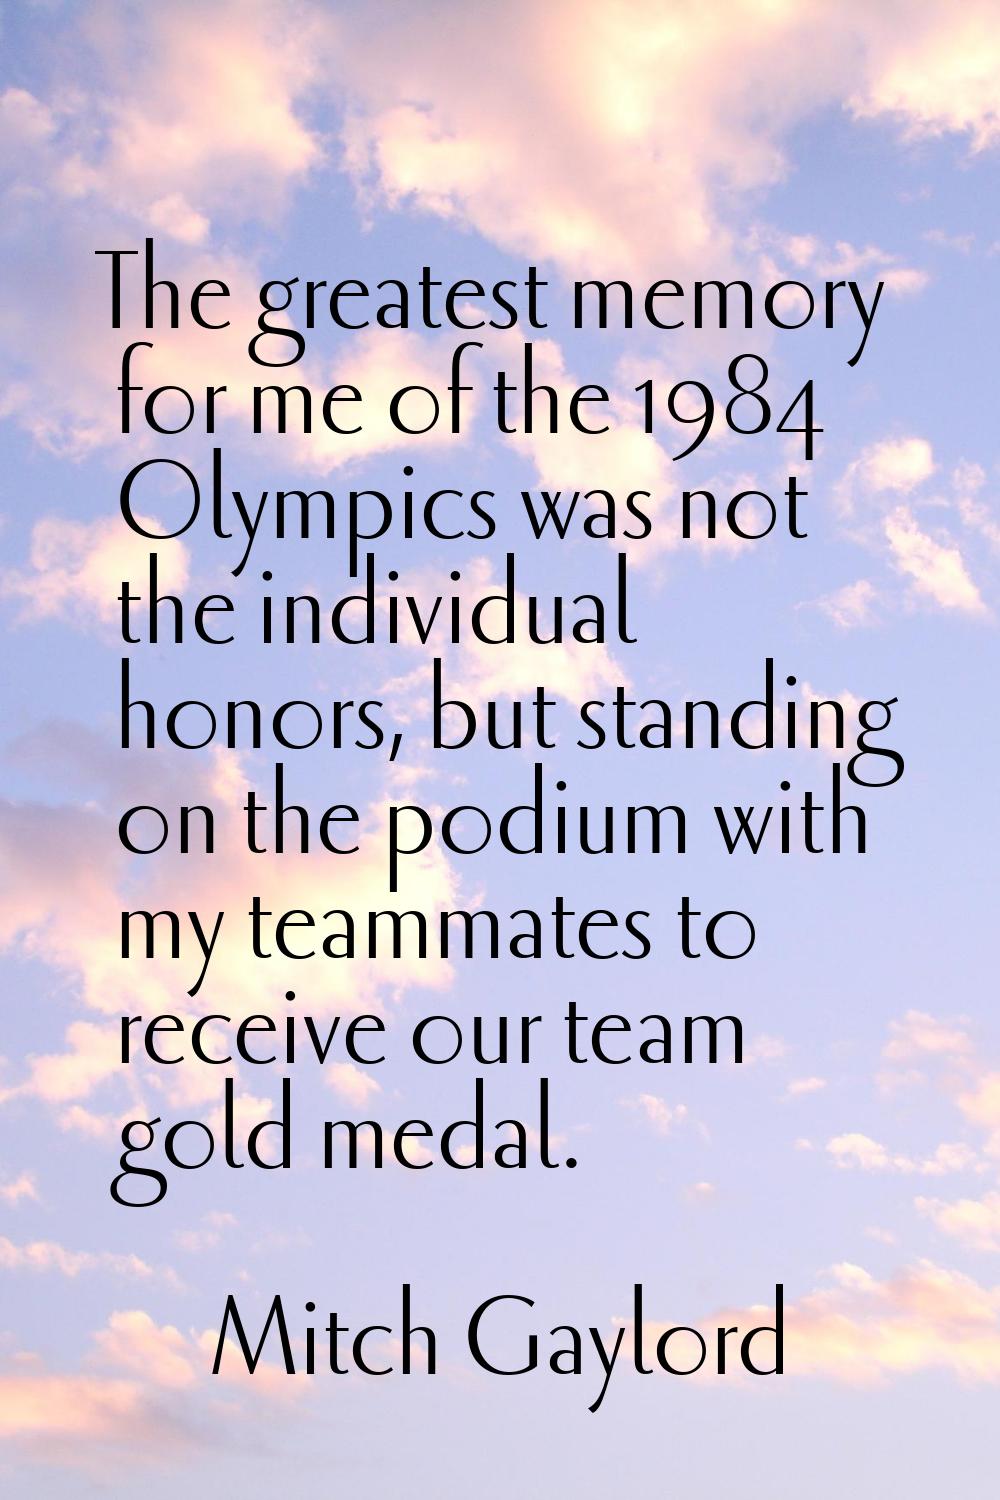 The greatest memory for me of the 1984 Olympics was not the individual honors, but standing on the 